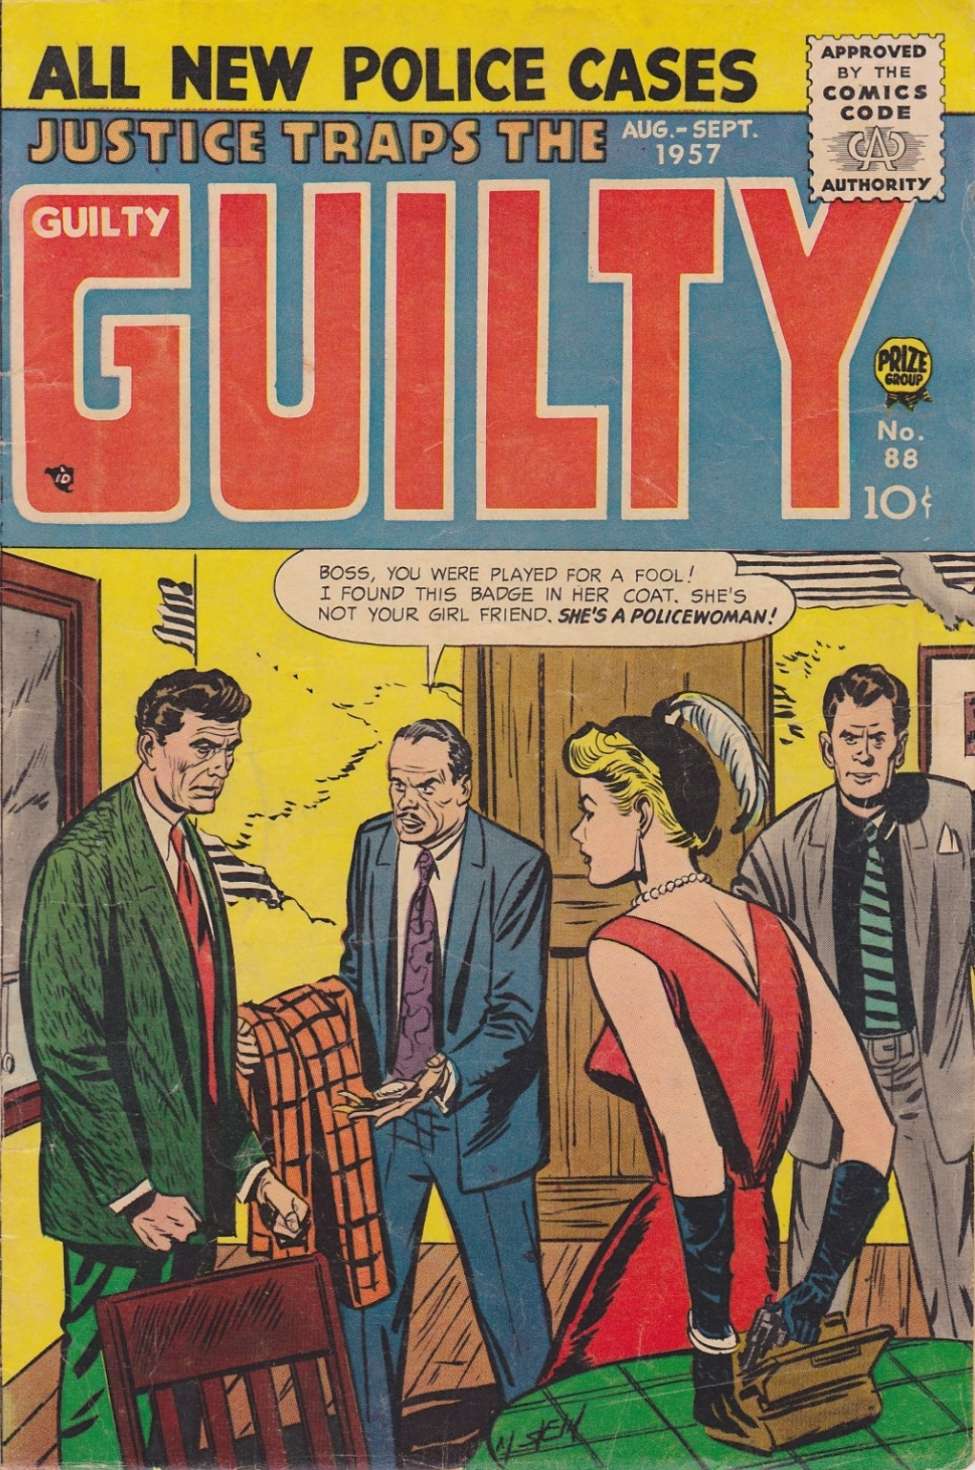 Book Cover For Justice Traps the Guilty 88